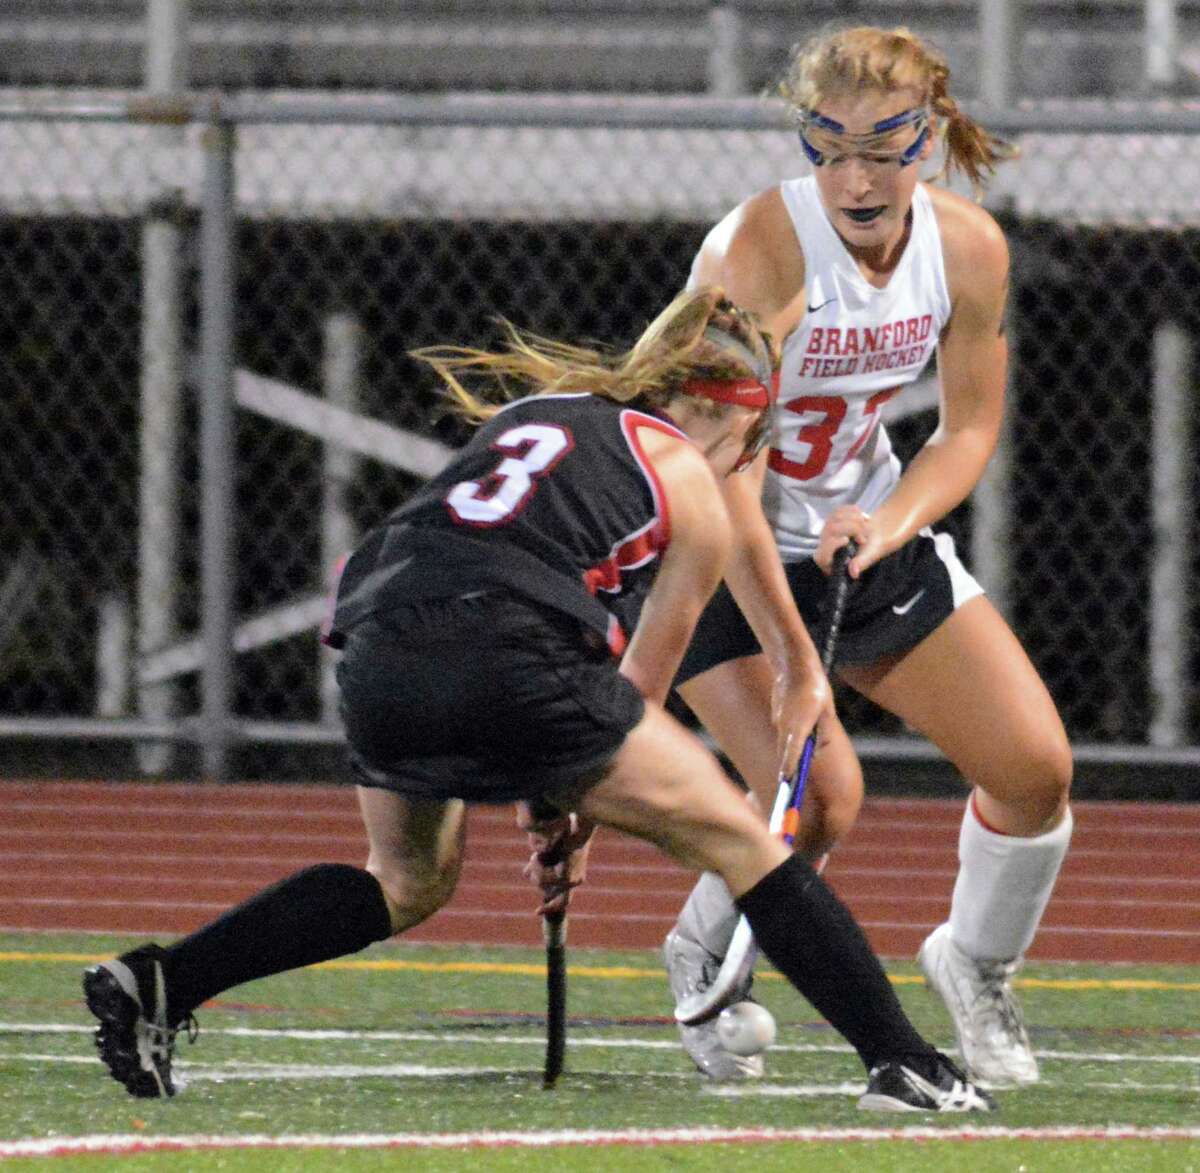 Branford defeated Cheshire, 1-0, in overtime on Oct. 4, 2017. (Photos by Dave Phillips)